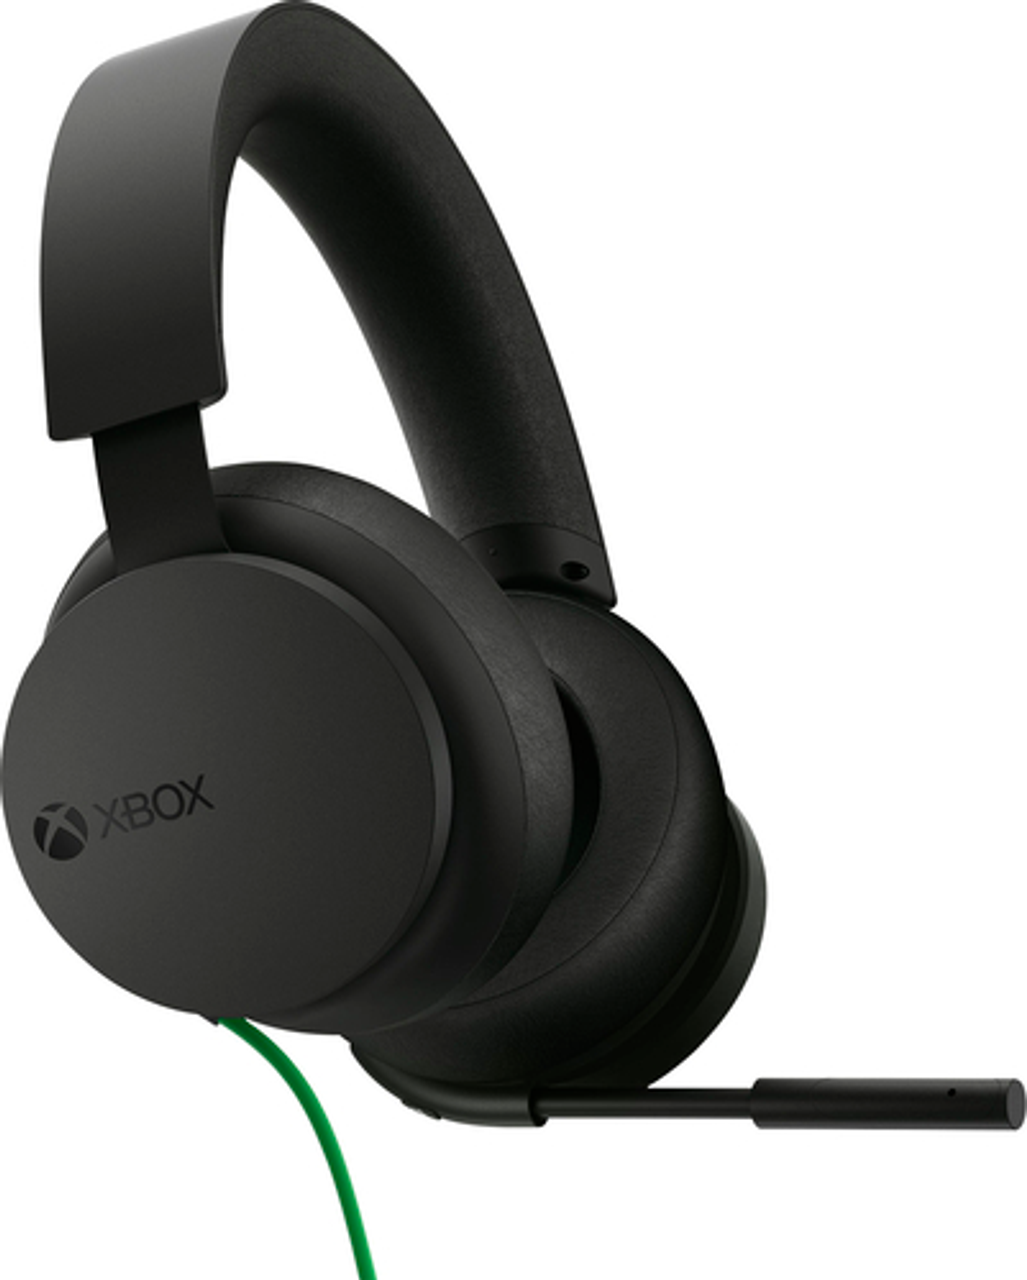 Microsoft - Xbox Stereo Headset for Xbox Series X|S, Xbox One, and Windows 10 Devices - Black